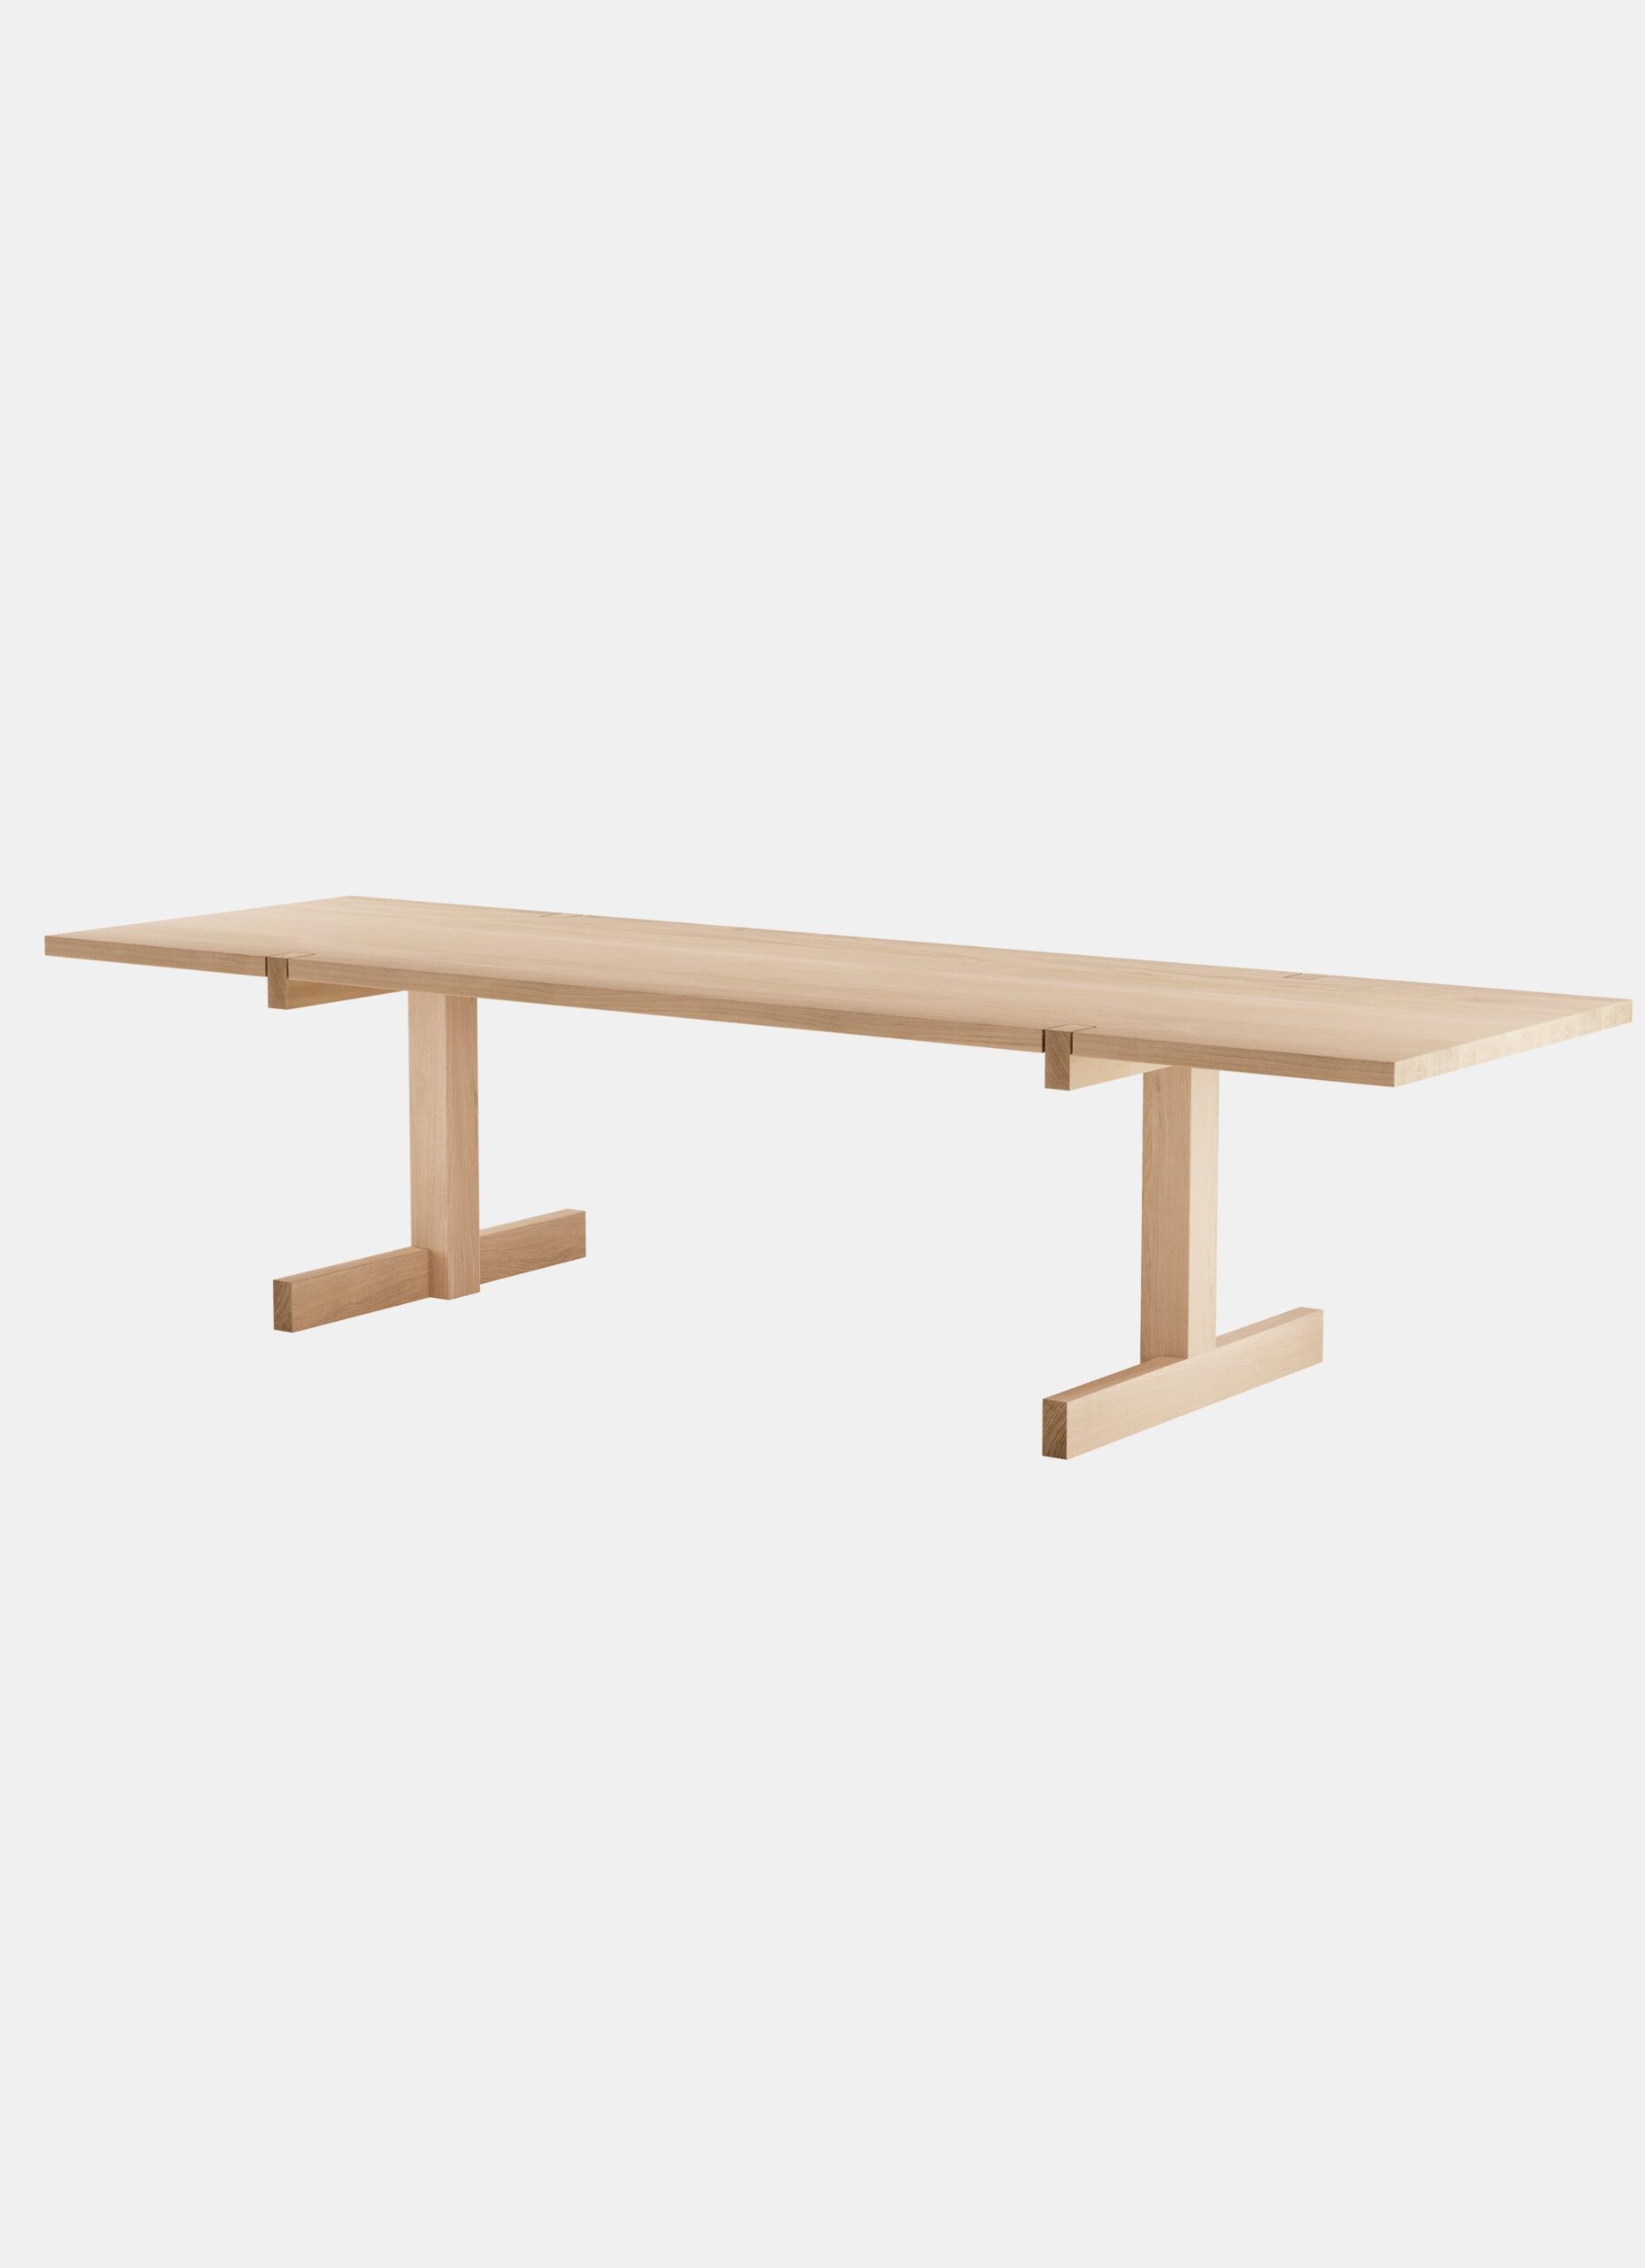 Objekte unserer Tage - OUT - Richter - Table - different woods and sizes